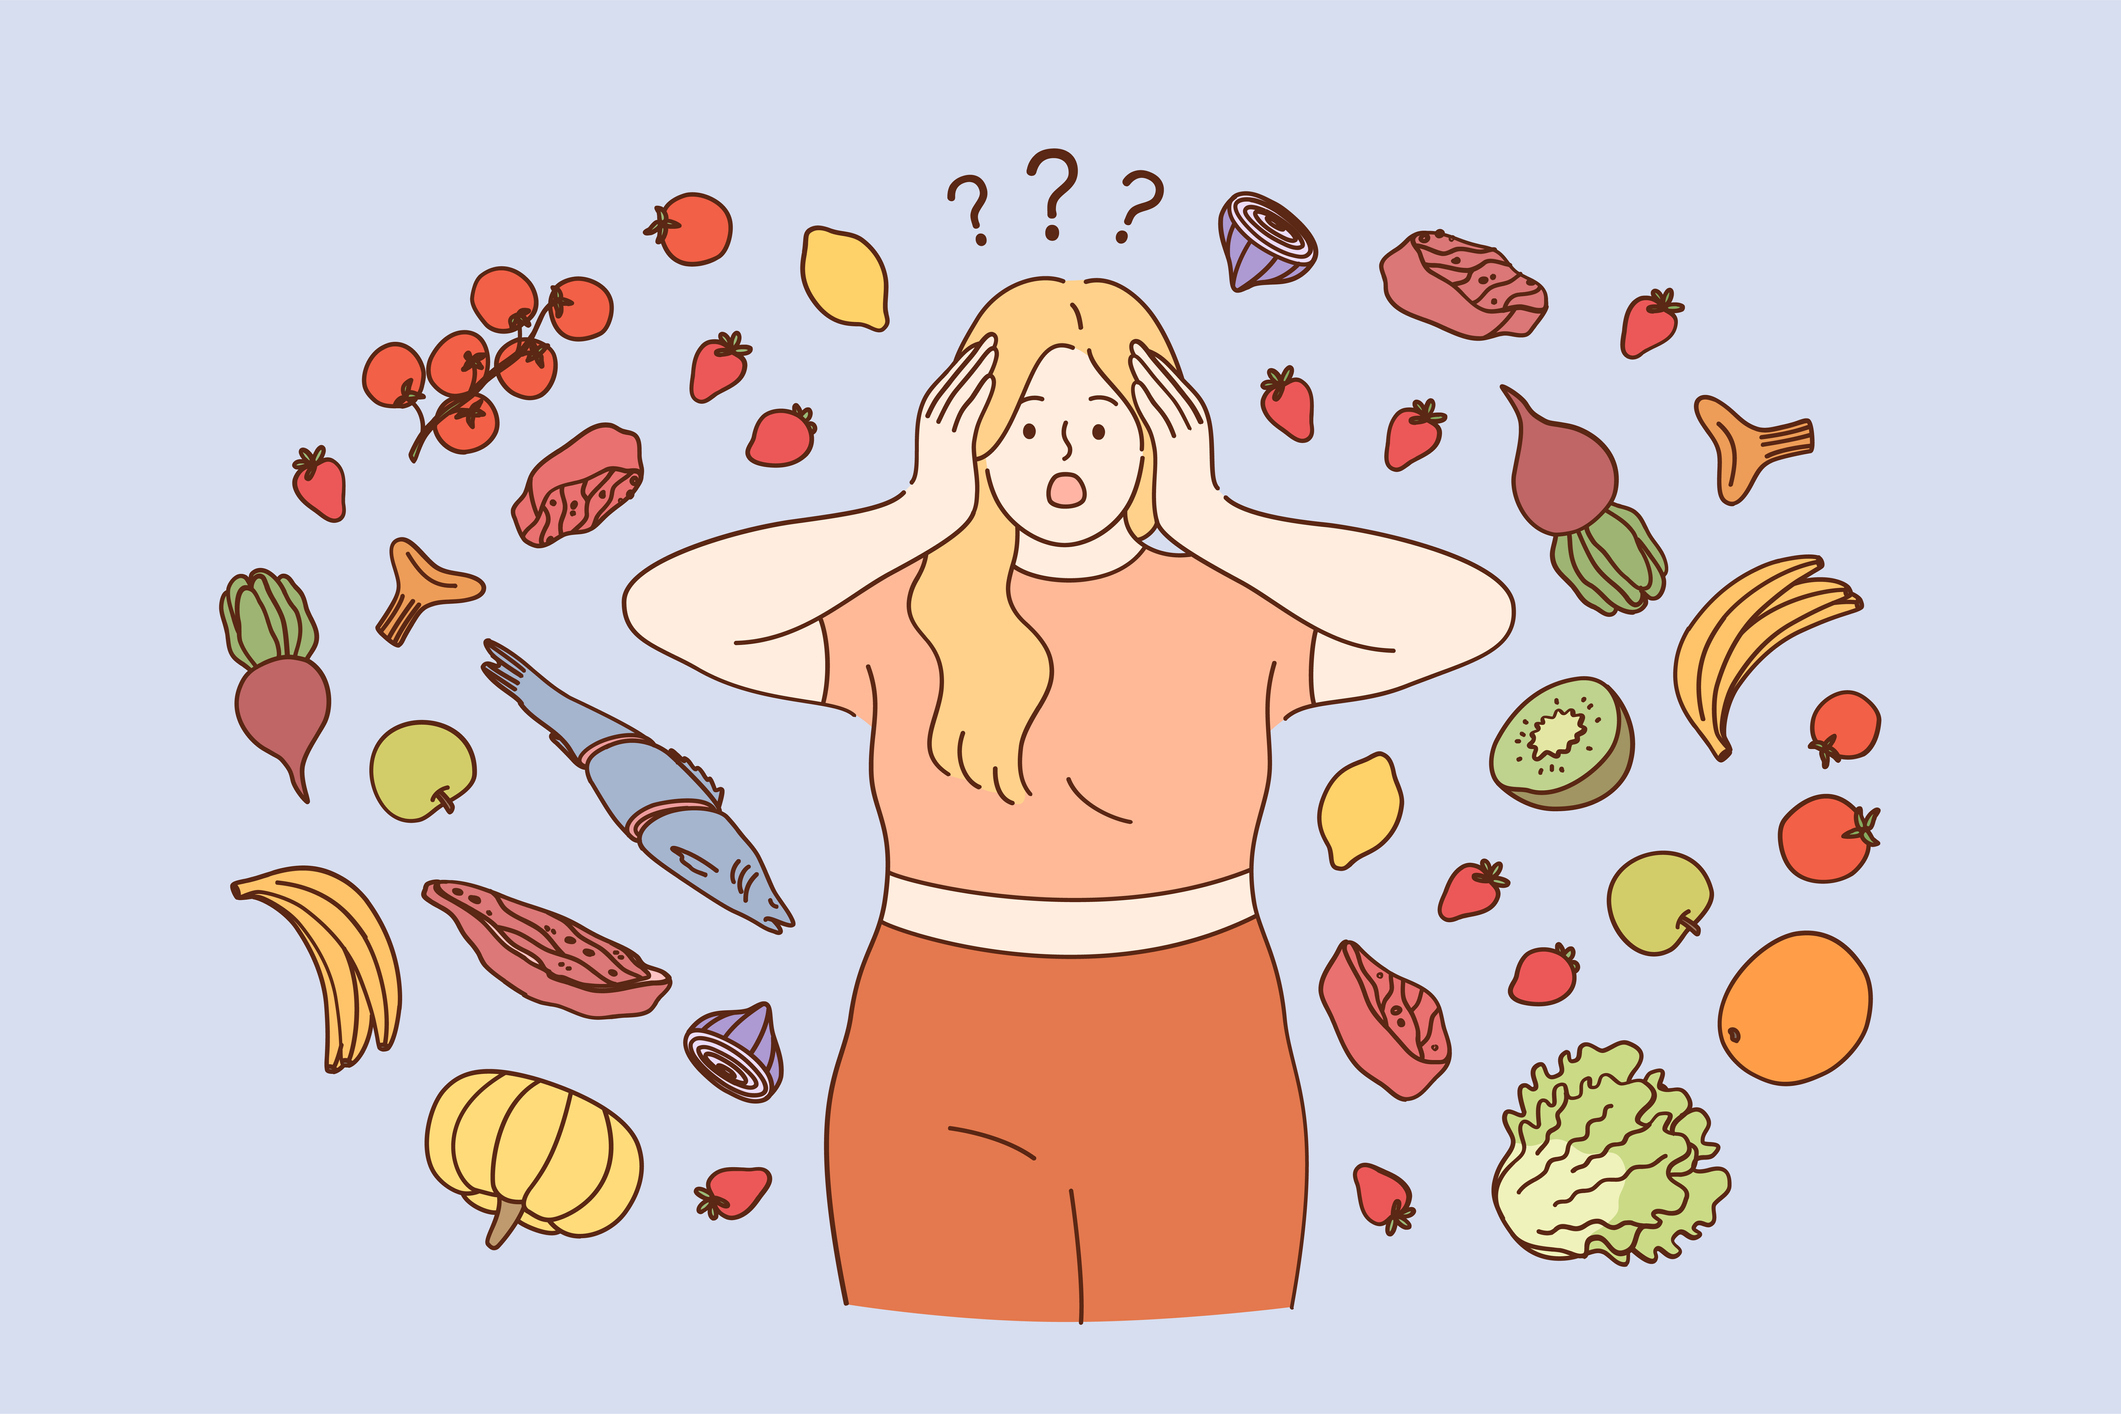 Illustration of a woman with hands on head, surrounded by various floating foods, expressing confusion or overwhelm